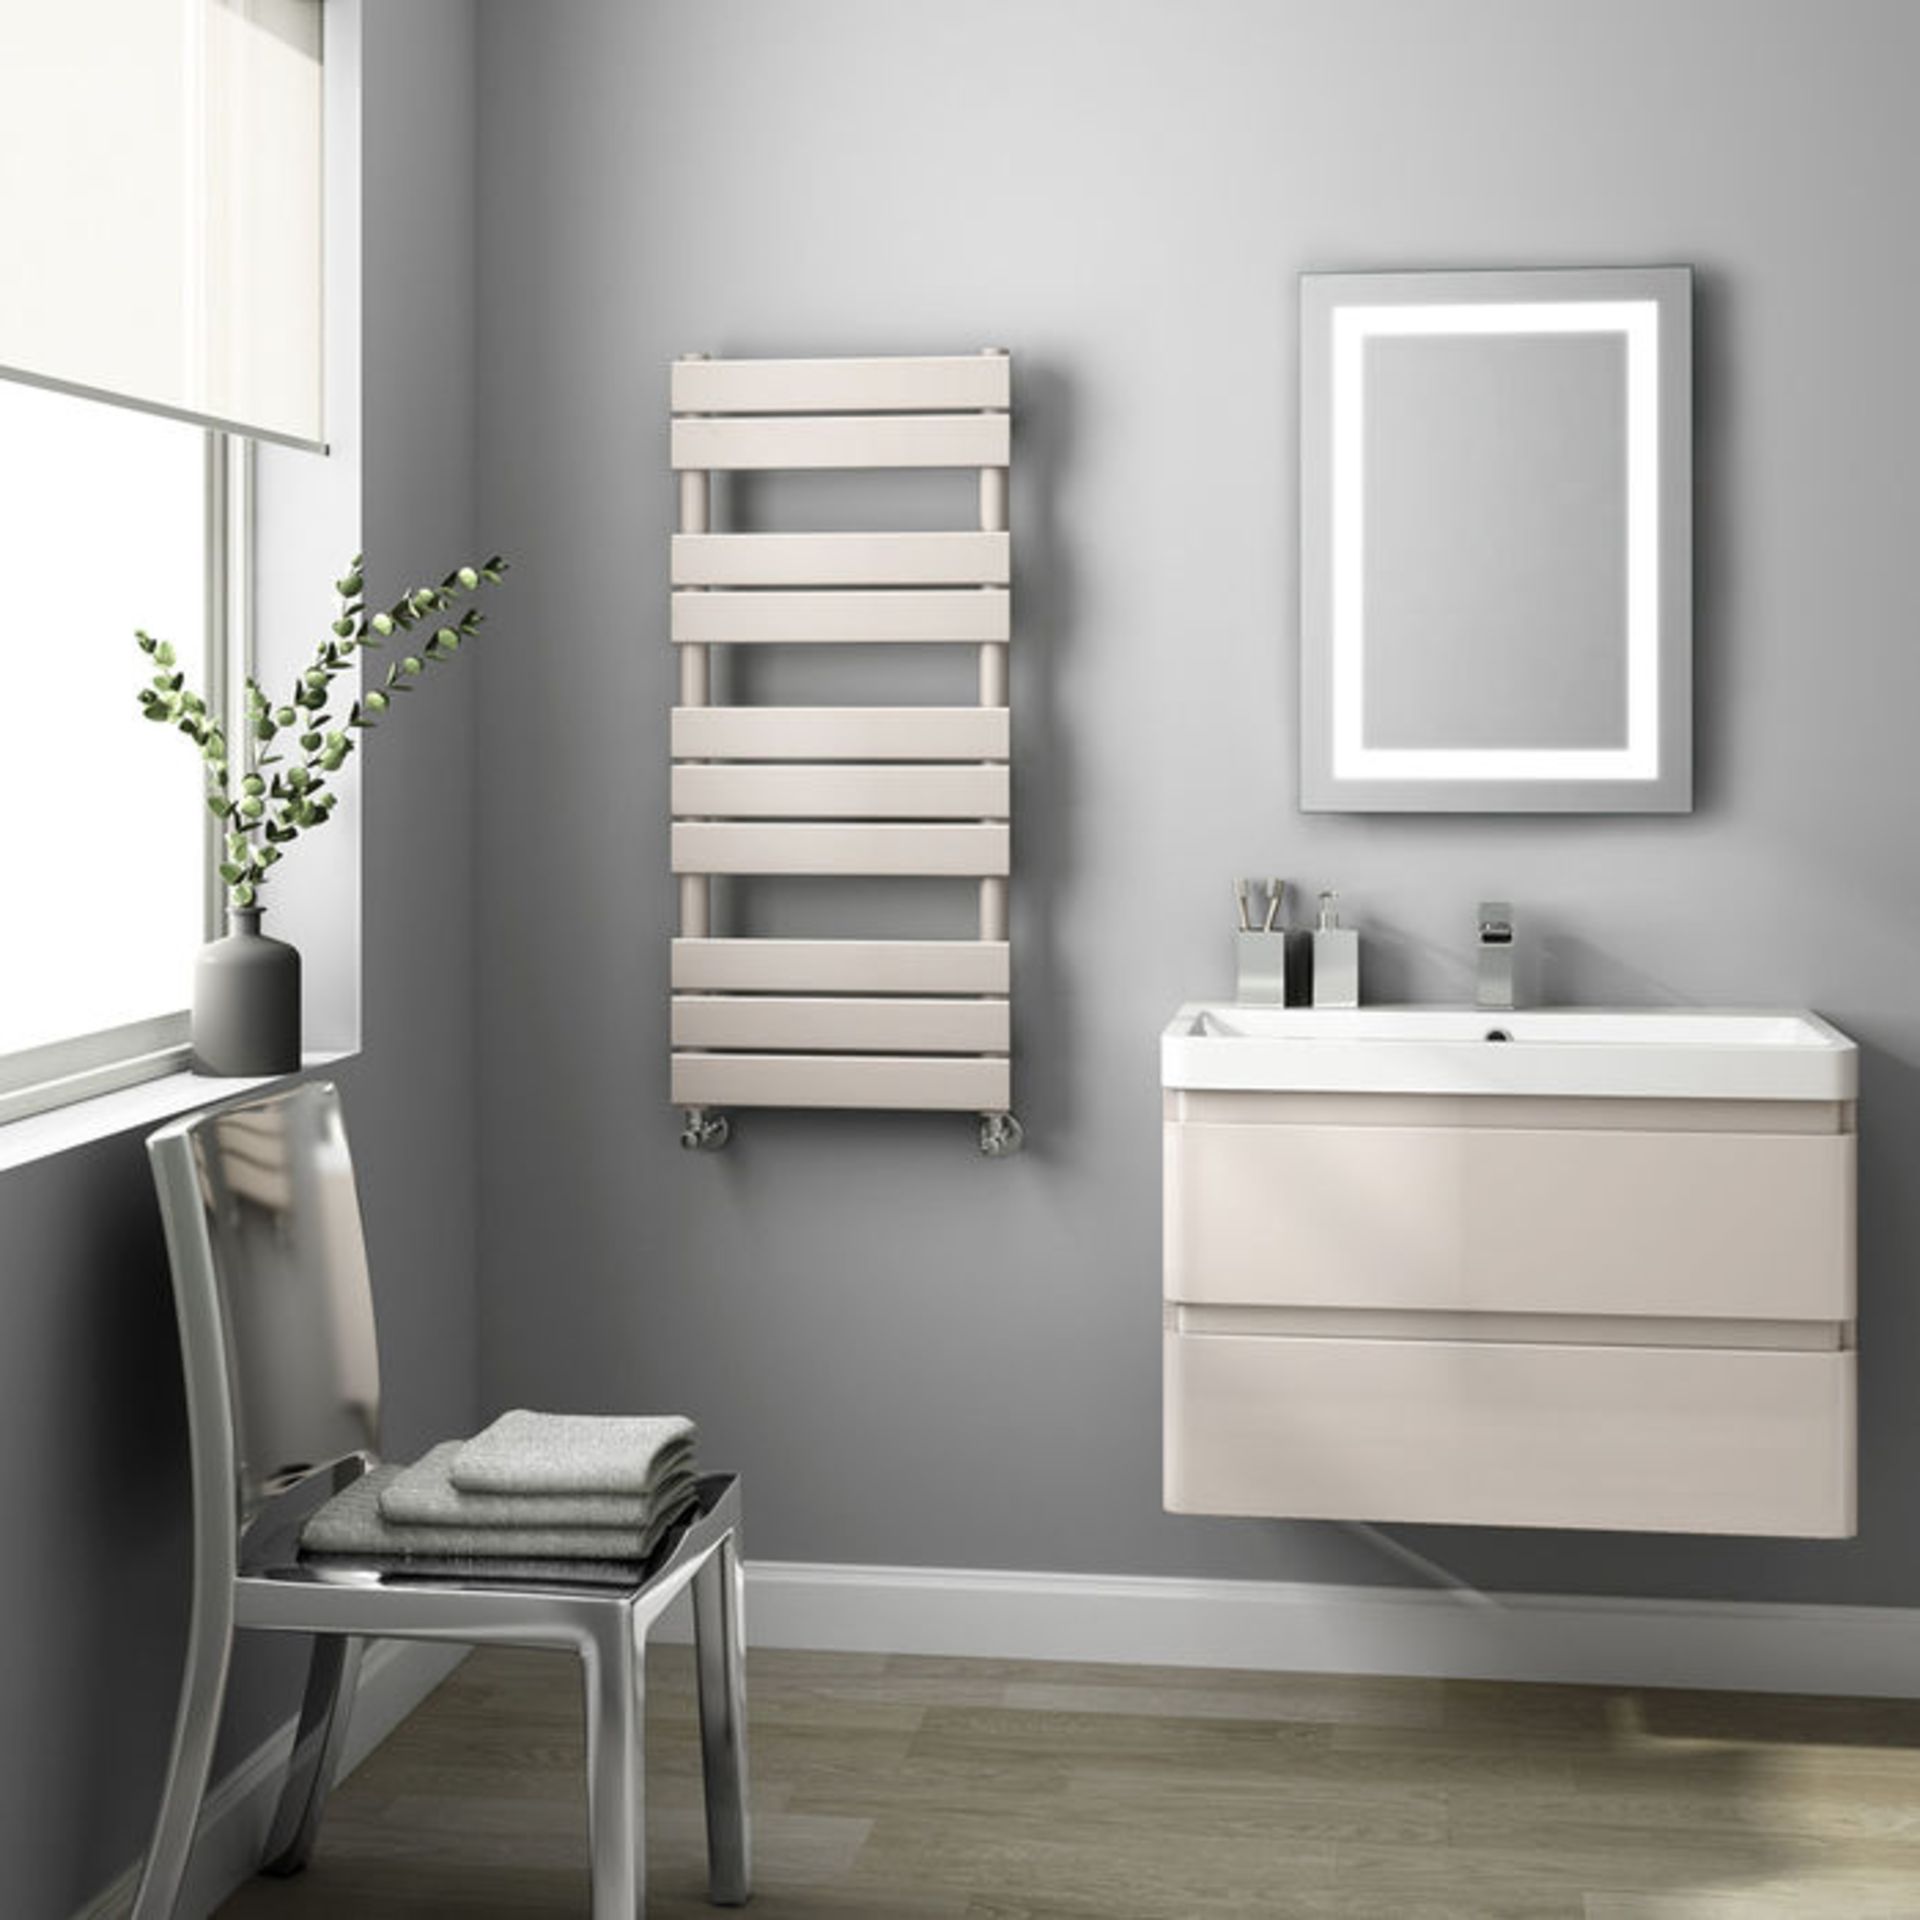 (JM117) 1000x450MM Flat Single towel radiator Cashmere. RRP £299.99. Made from high-quality low- - Image 2 of 3